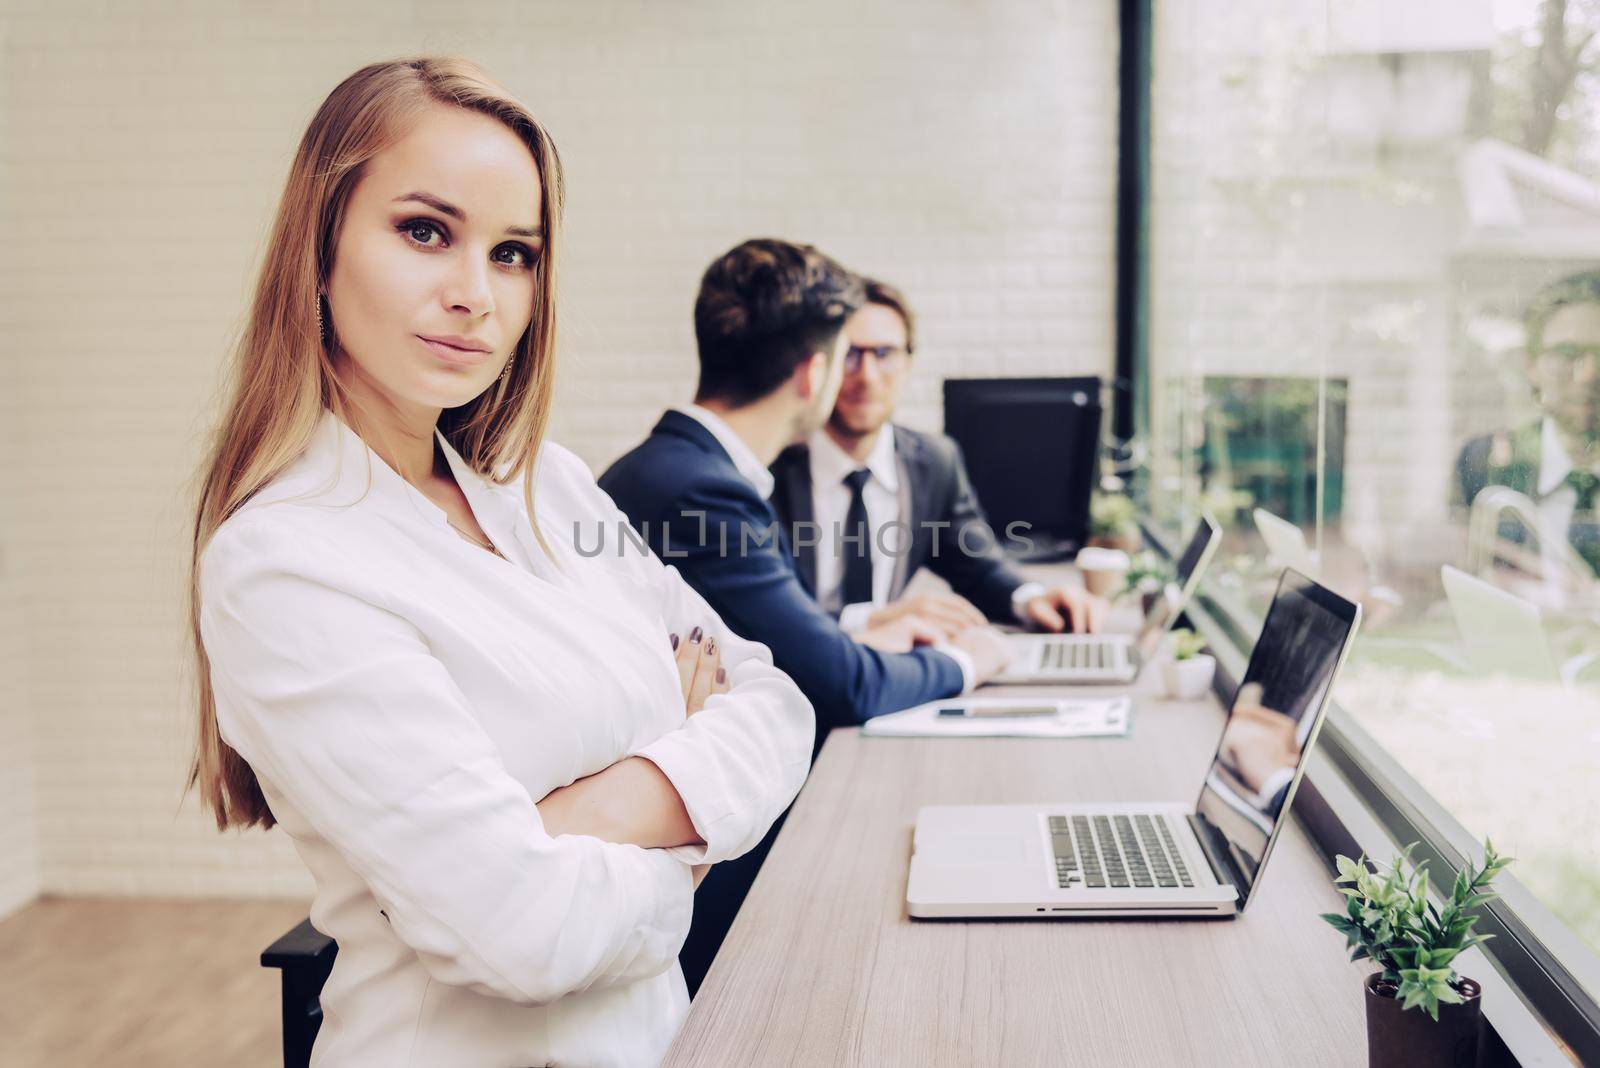 Business woman working with business team by laptop computer. Beauty and Technology concept. Smart lady and working woman theme. Office and happy life theme. by MiniStocker